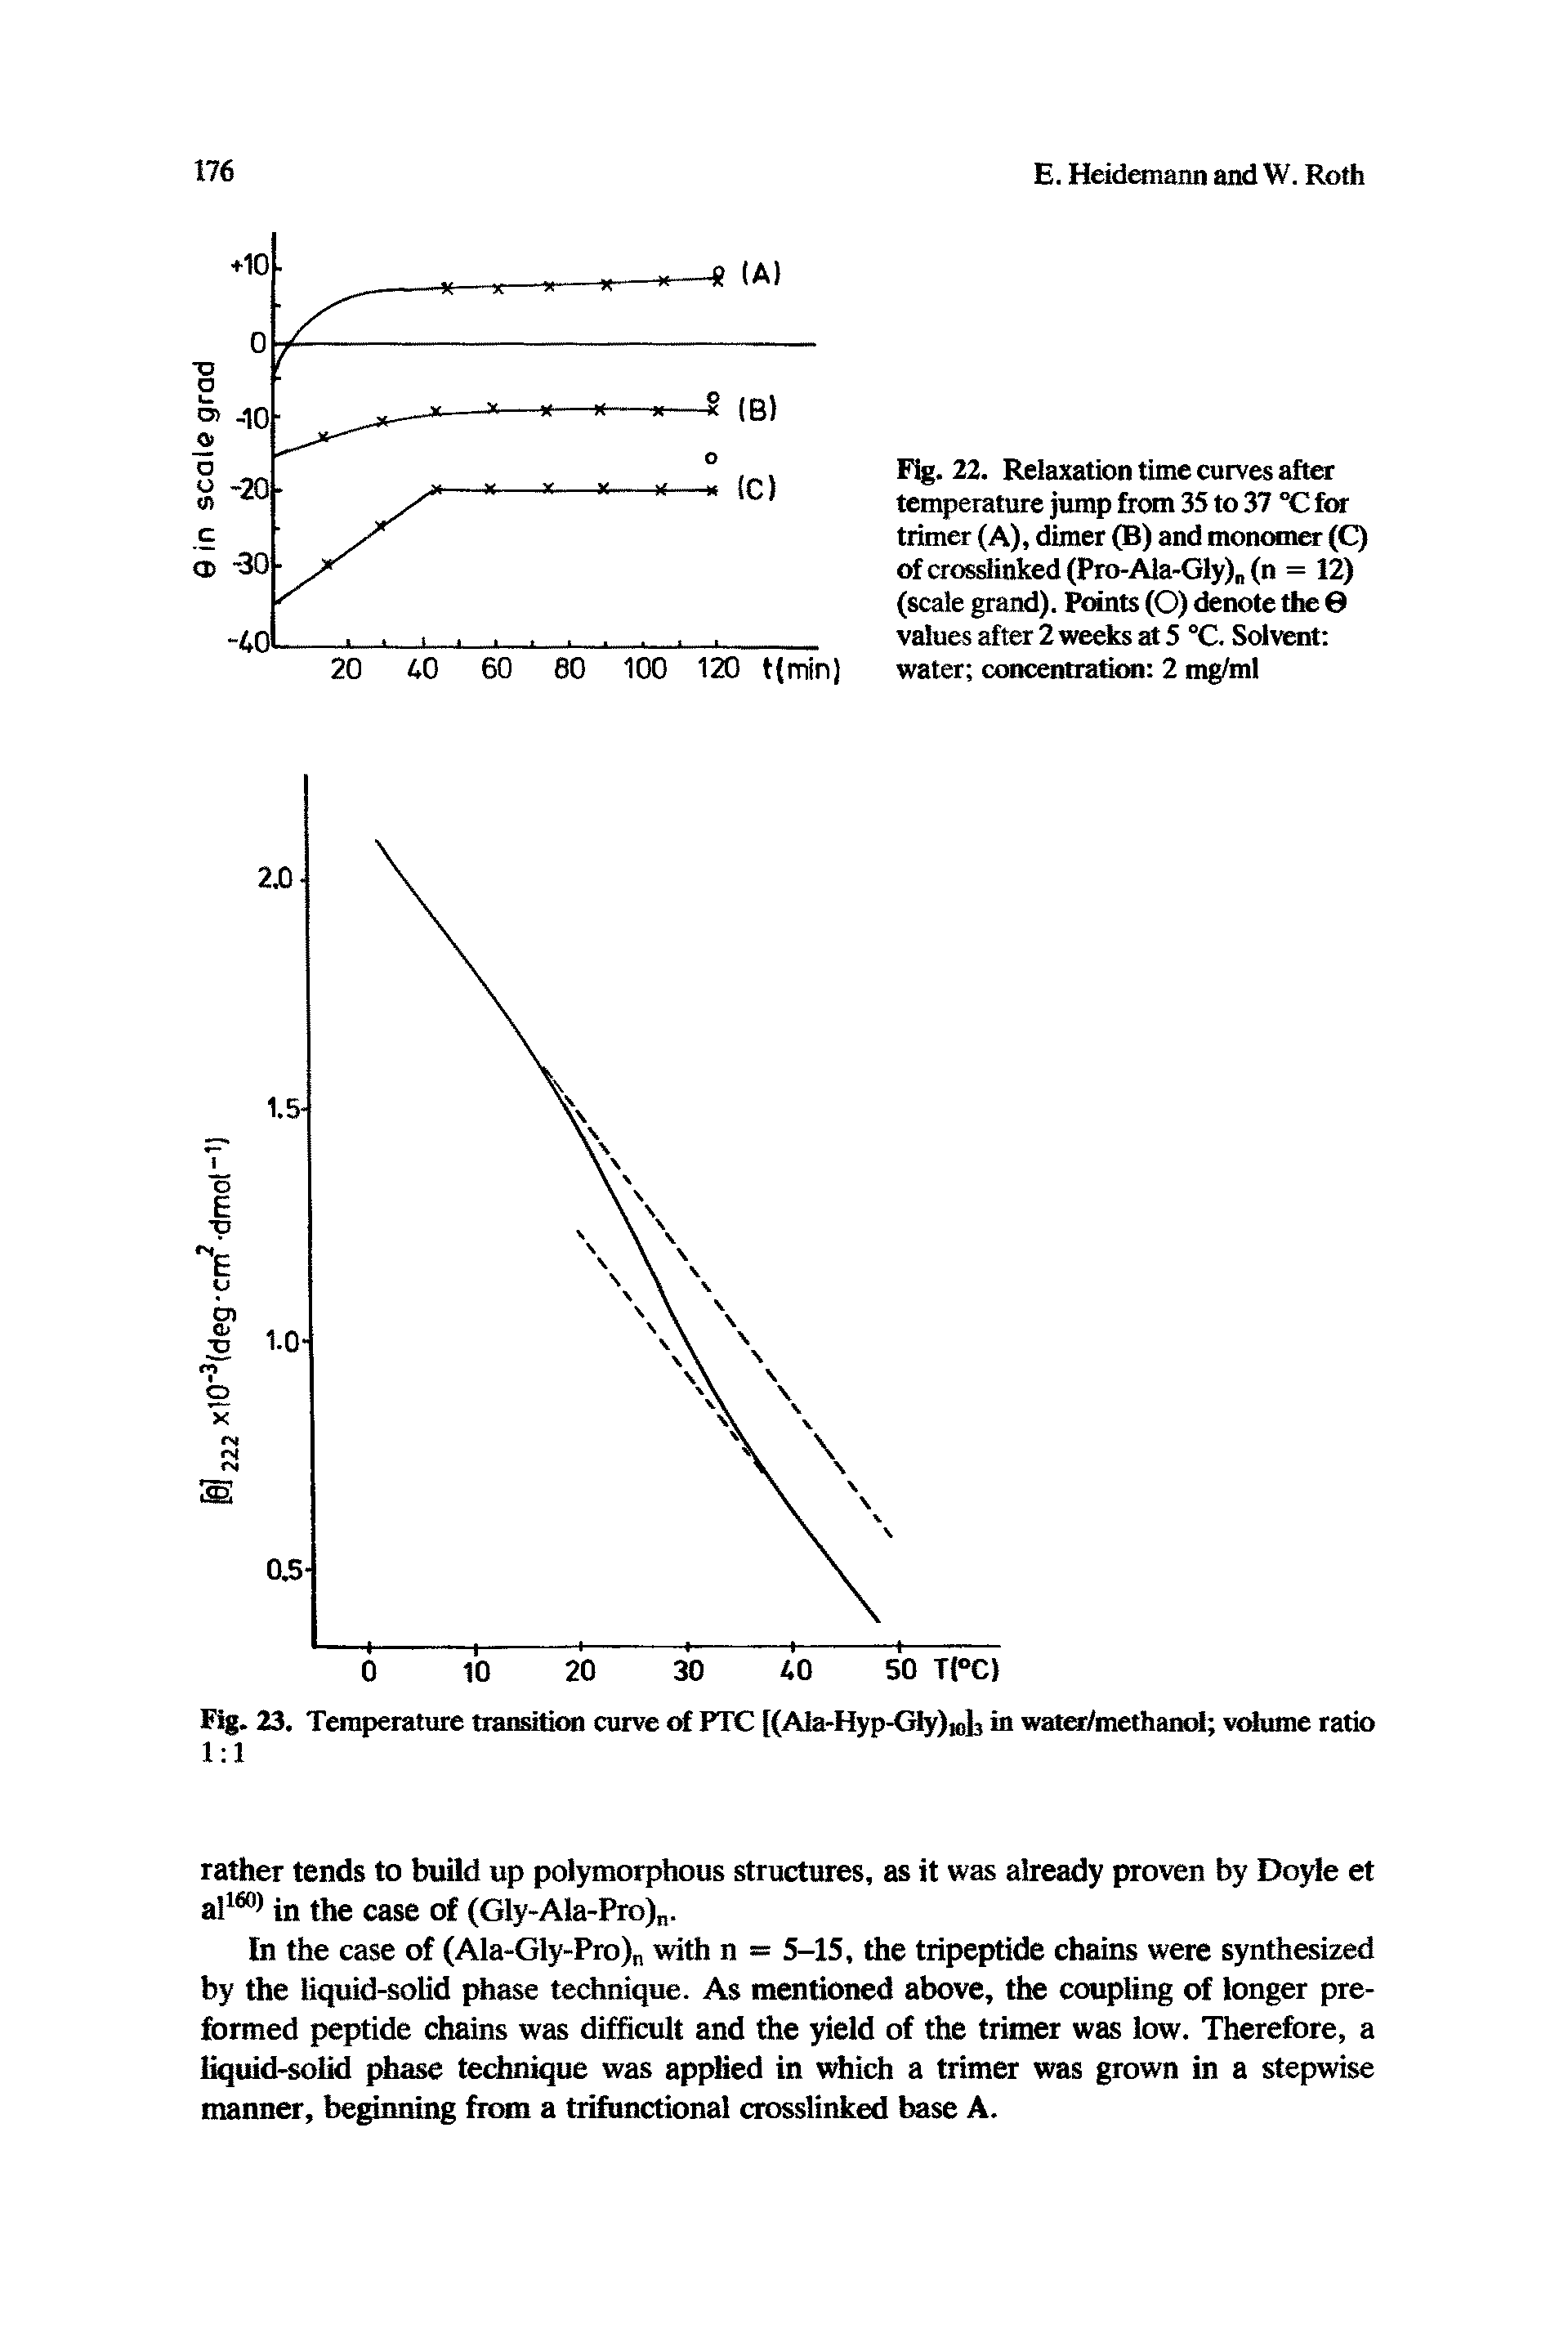 Fig. 23. Temperature transition curve of PTC [(Ala-Hyp-Glyhd, in water/methanol volume ratio 1 1...